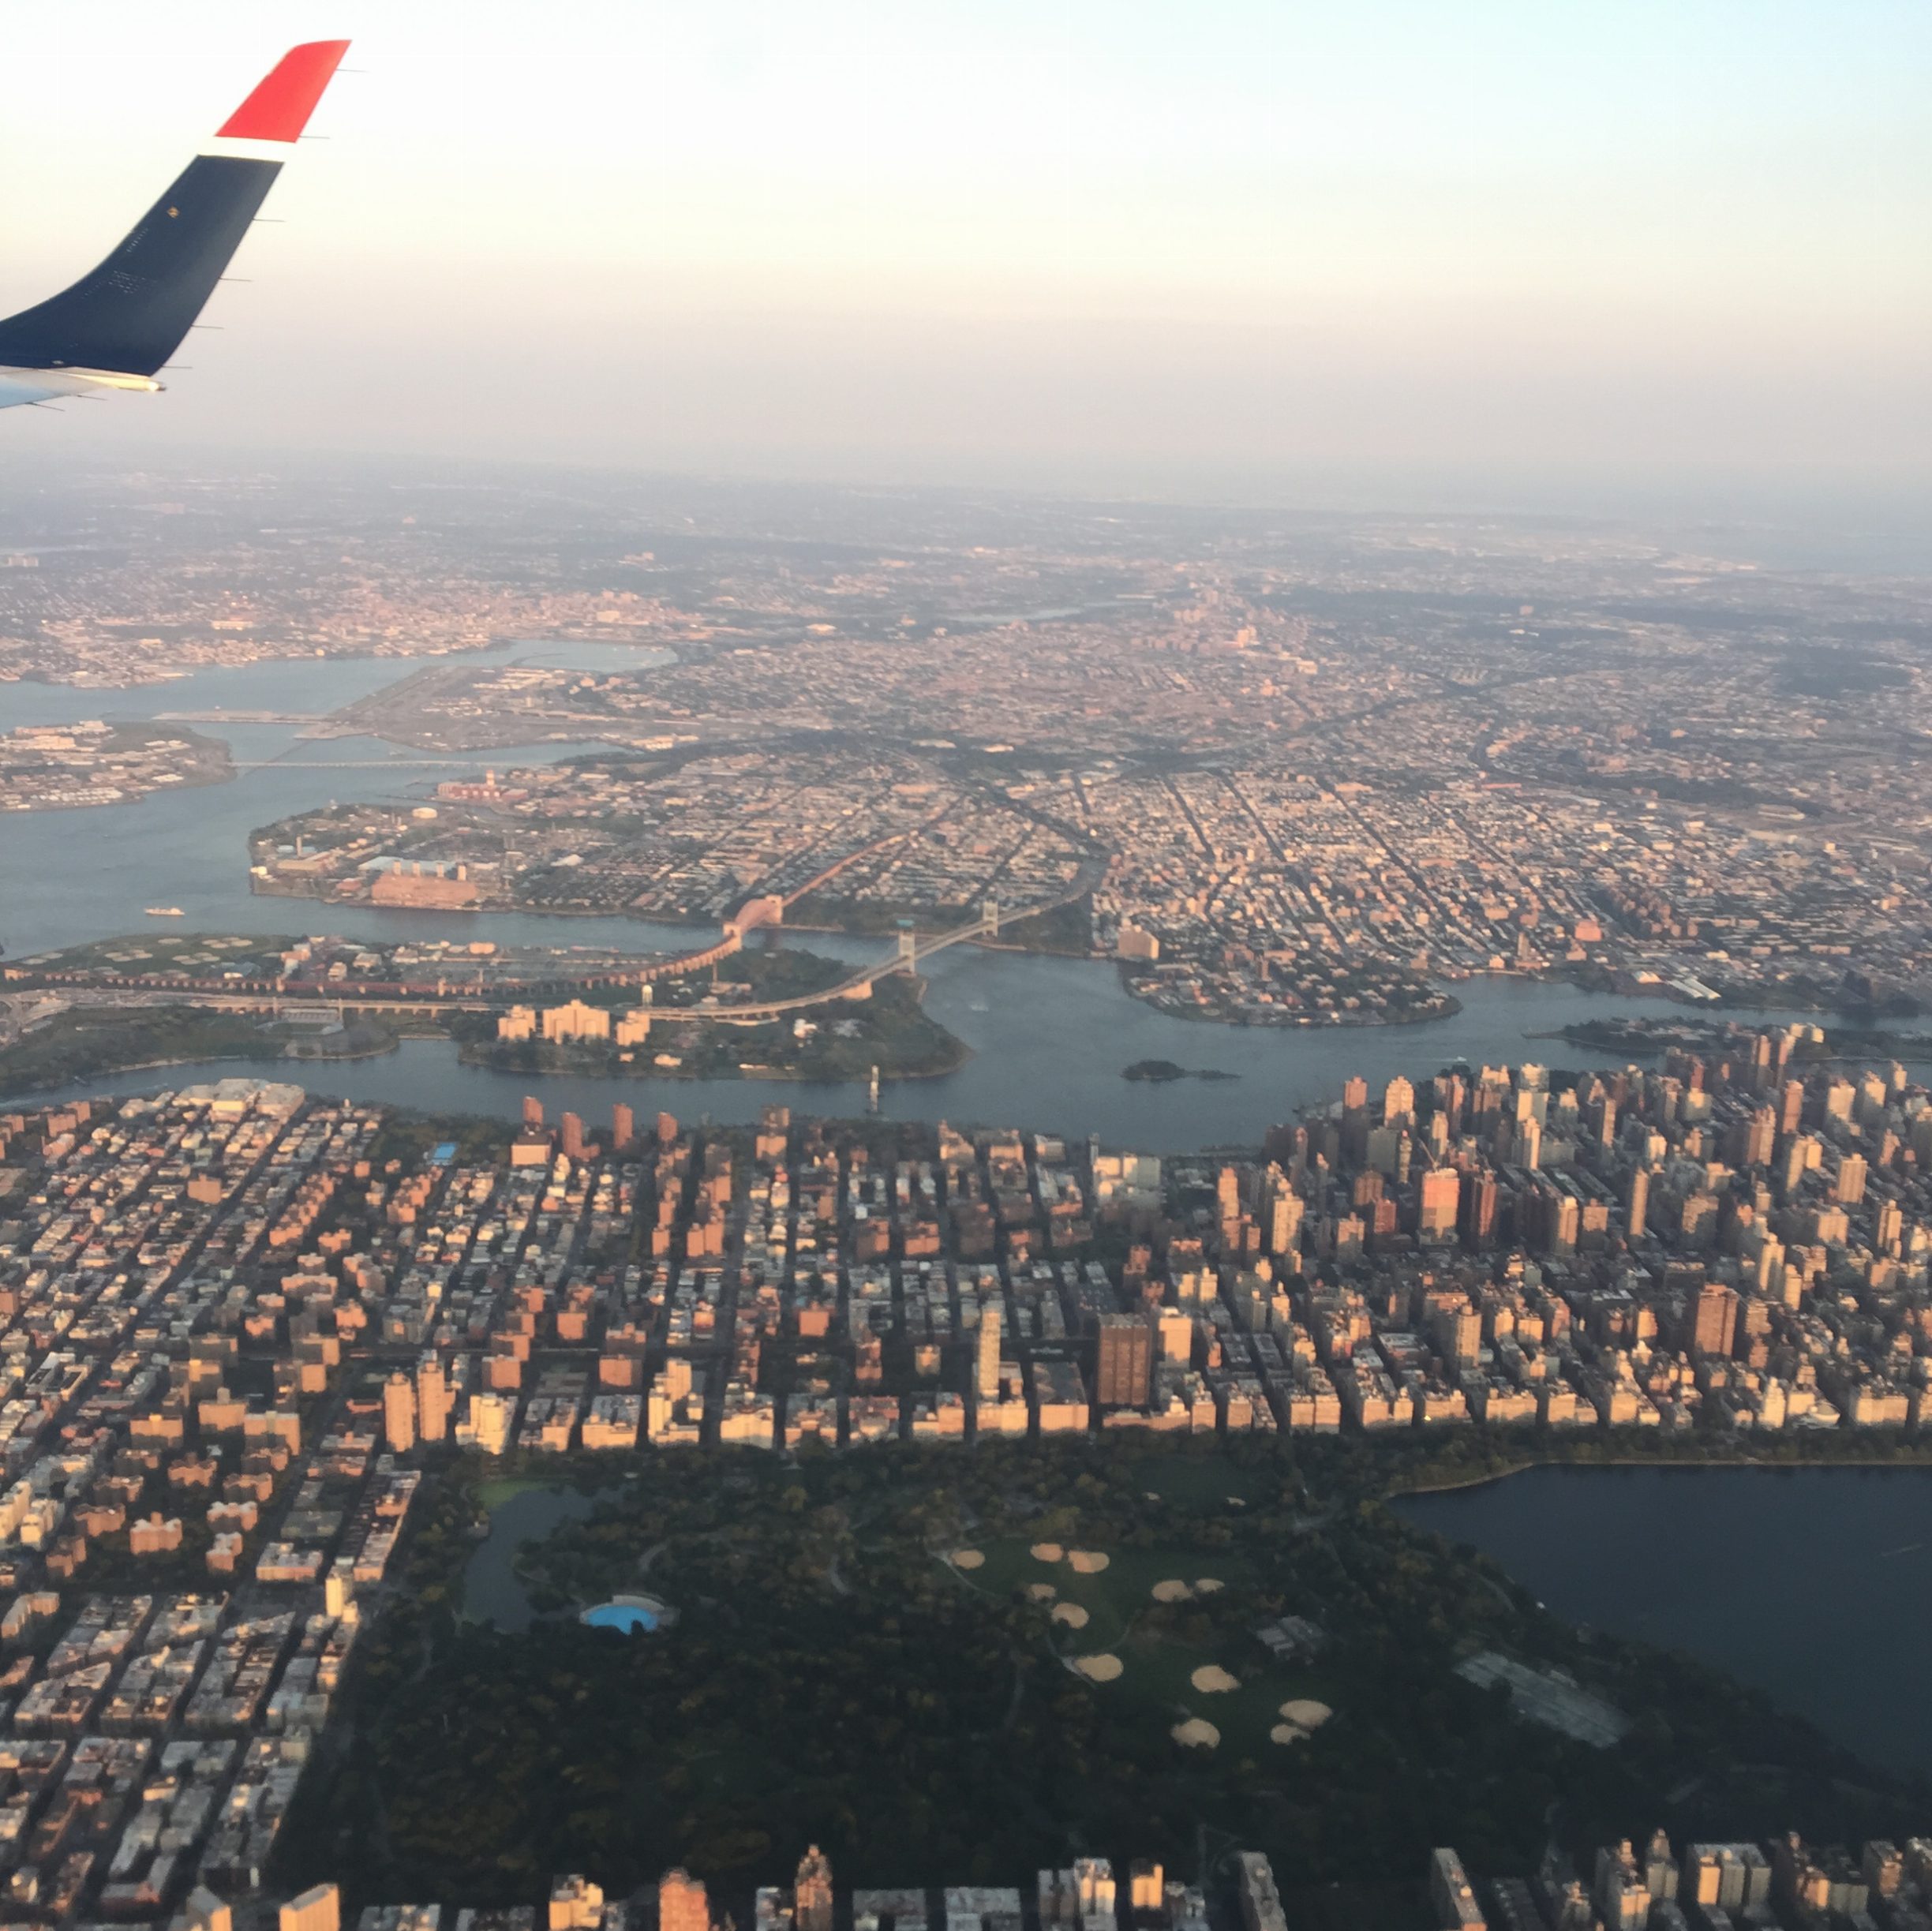 Flying over Central Park en route to La Guardia. Thank you British Airways Avios points for making flying to NYC a viable option. 